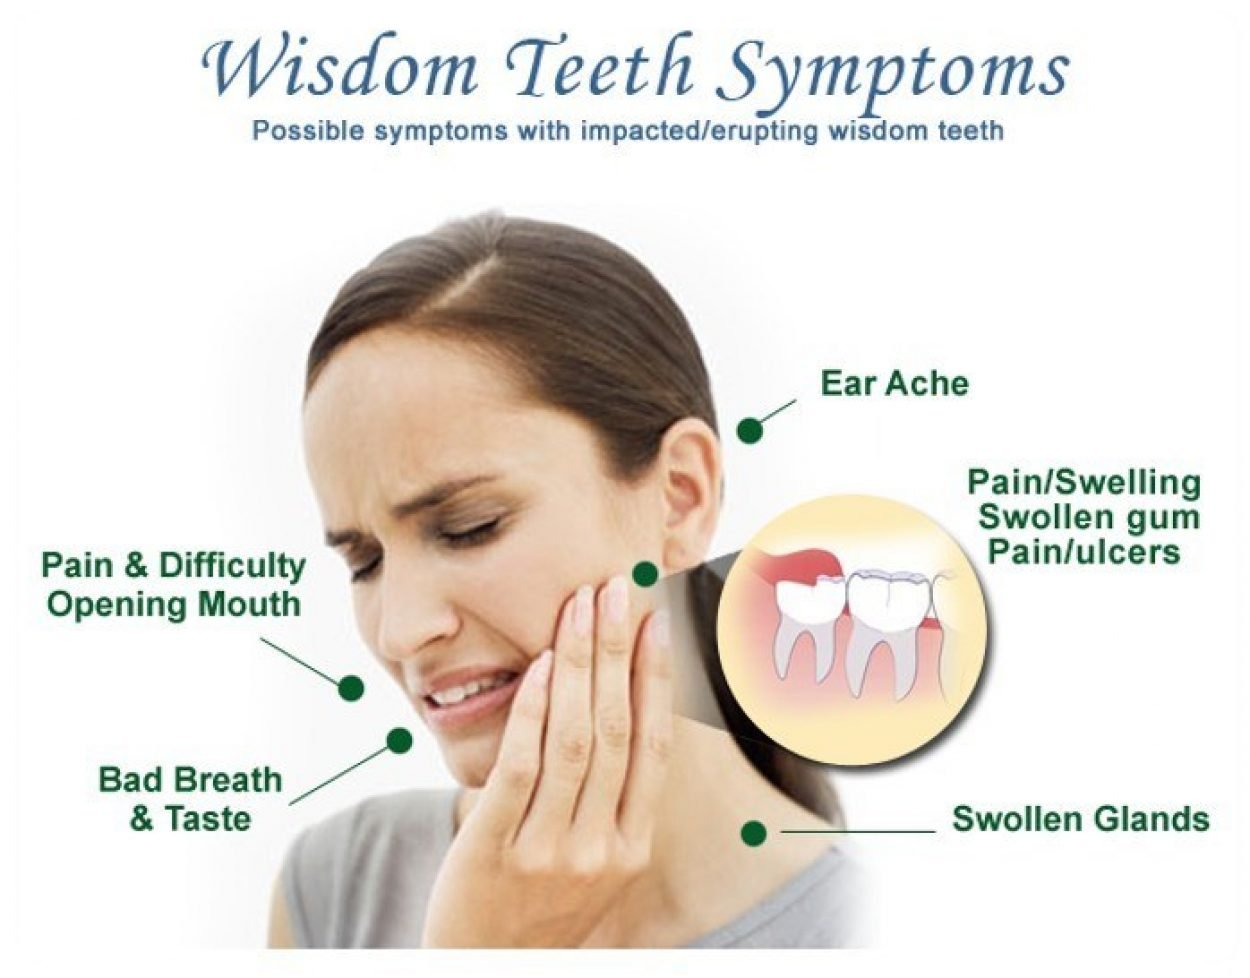 How To Ease Wisdom Tooth Pain While Pregnant / Wisdom Teeth Pictures ...